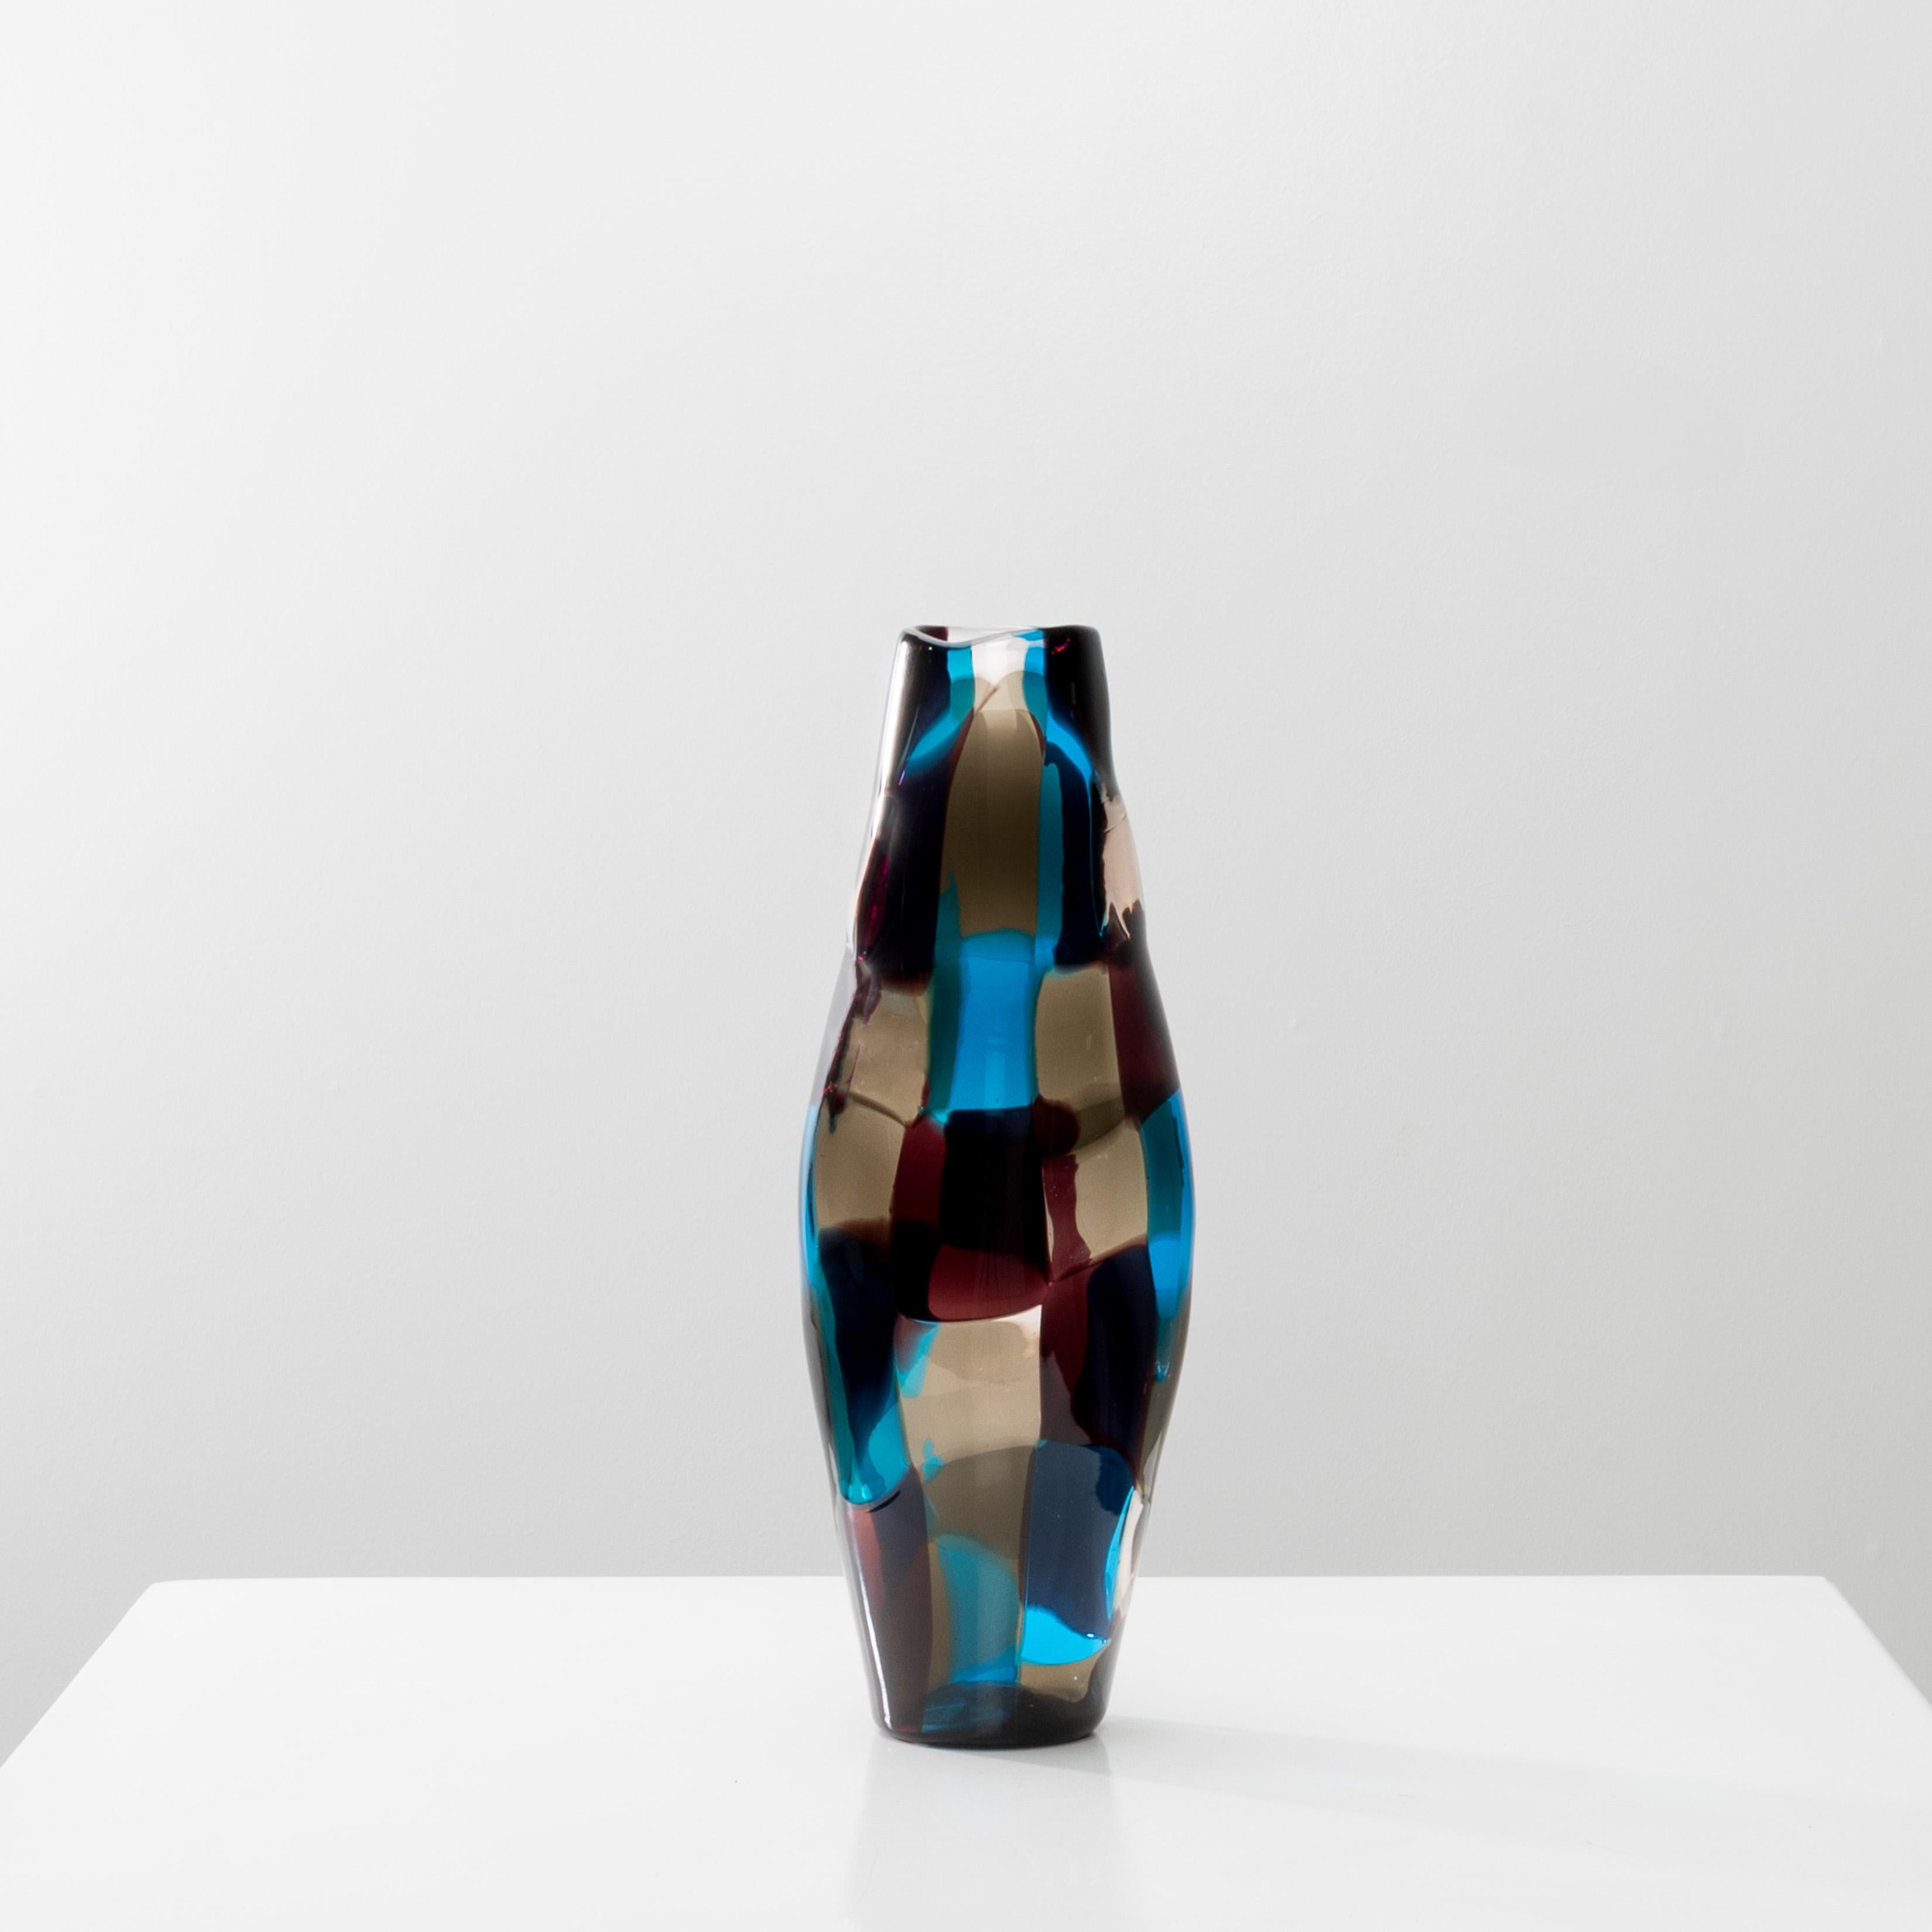 “Carrot” shaped pezzato vase, irregular section. The base and the neck are round.
Made up of an arrangement of ash gray, sky blue, wine red and clear tesserae.
This chromatic combination is sometimes called “Venezia”
Signature – round “venini murano